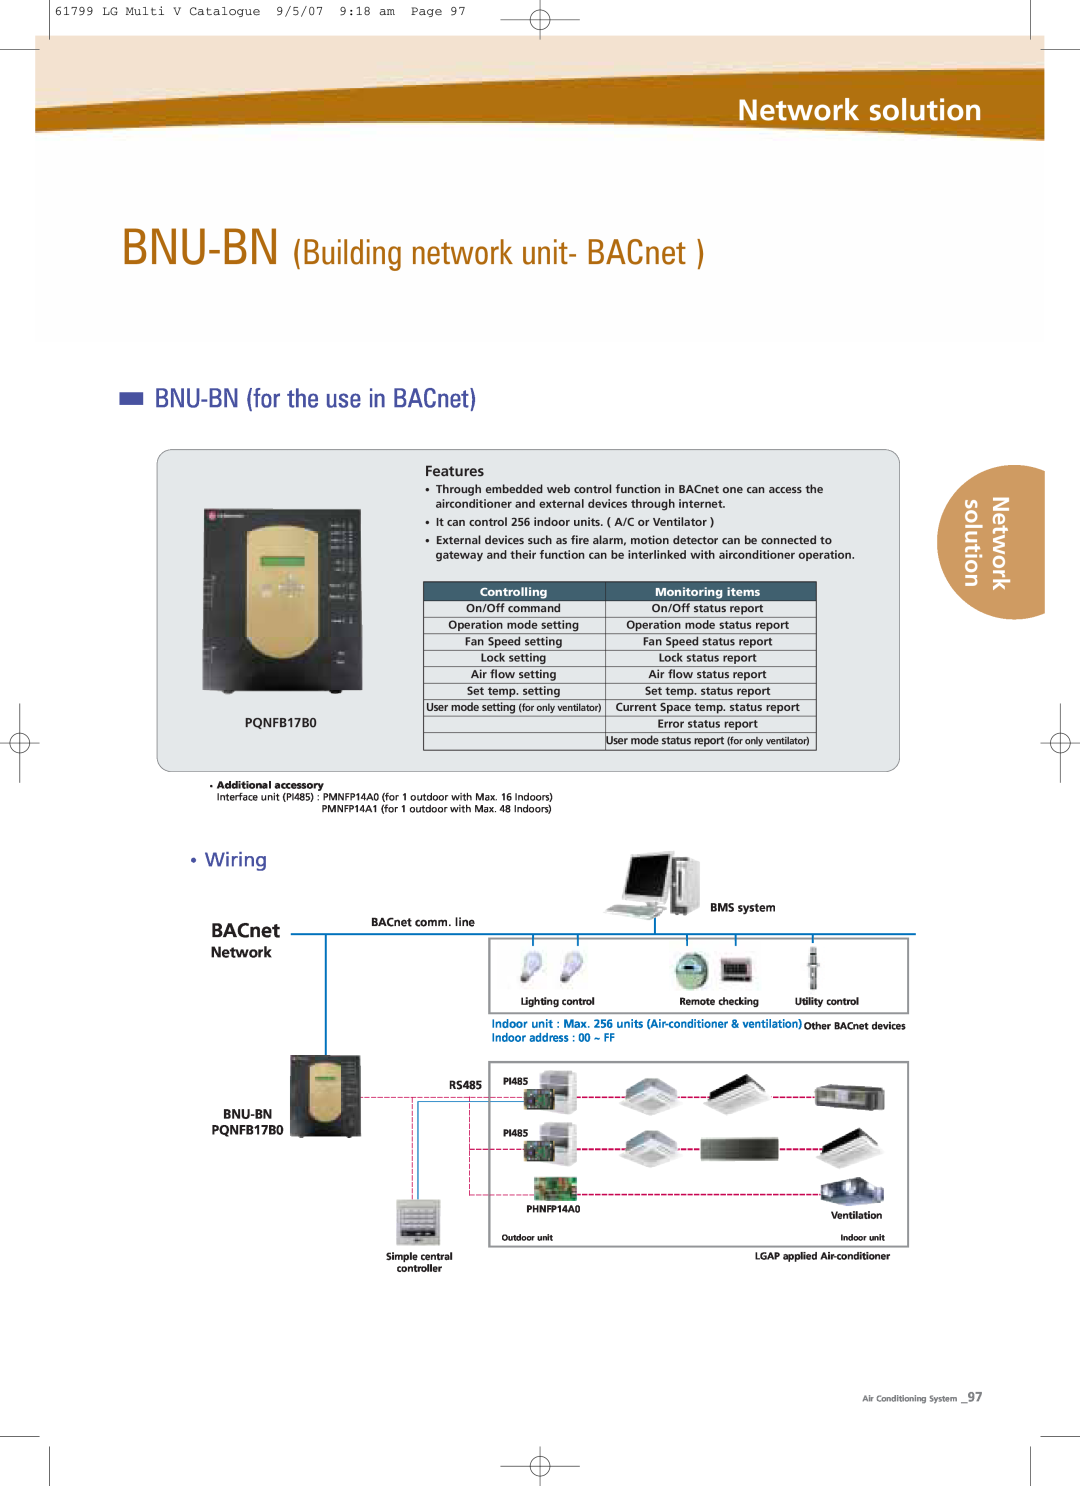 LG Electronics PRHR040 BNU-BN Building network unit- BACnet, BNU-BN for the use in BACnet, Network solution, Wiring, PI485 